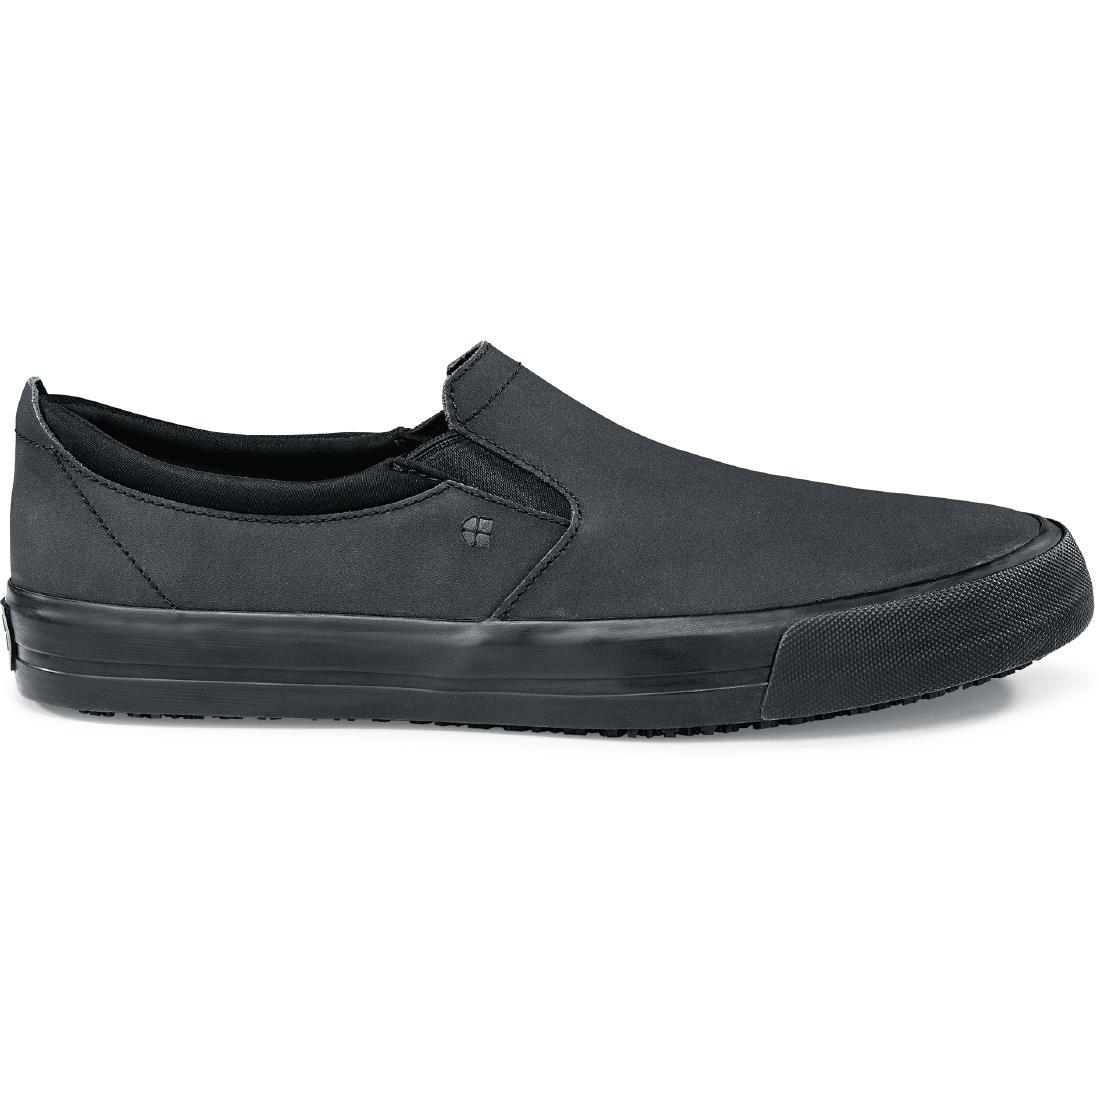 Shoes for Crews Leather Slip On Size 42 - BB163-42  - 4